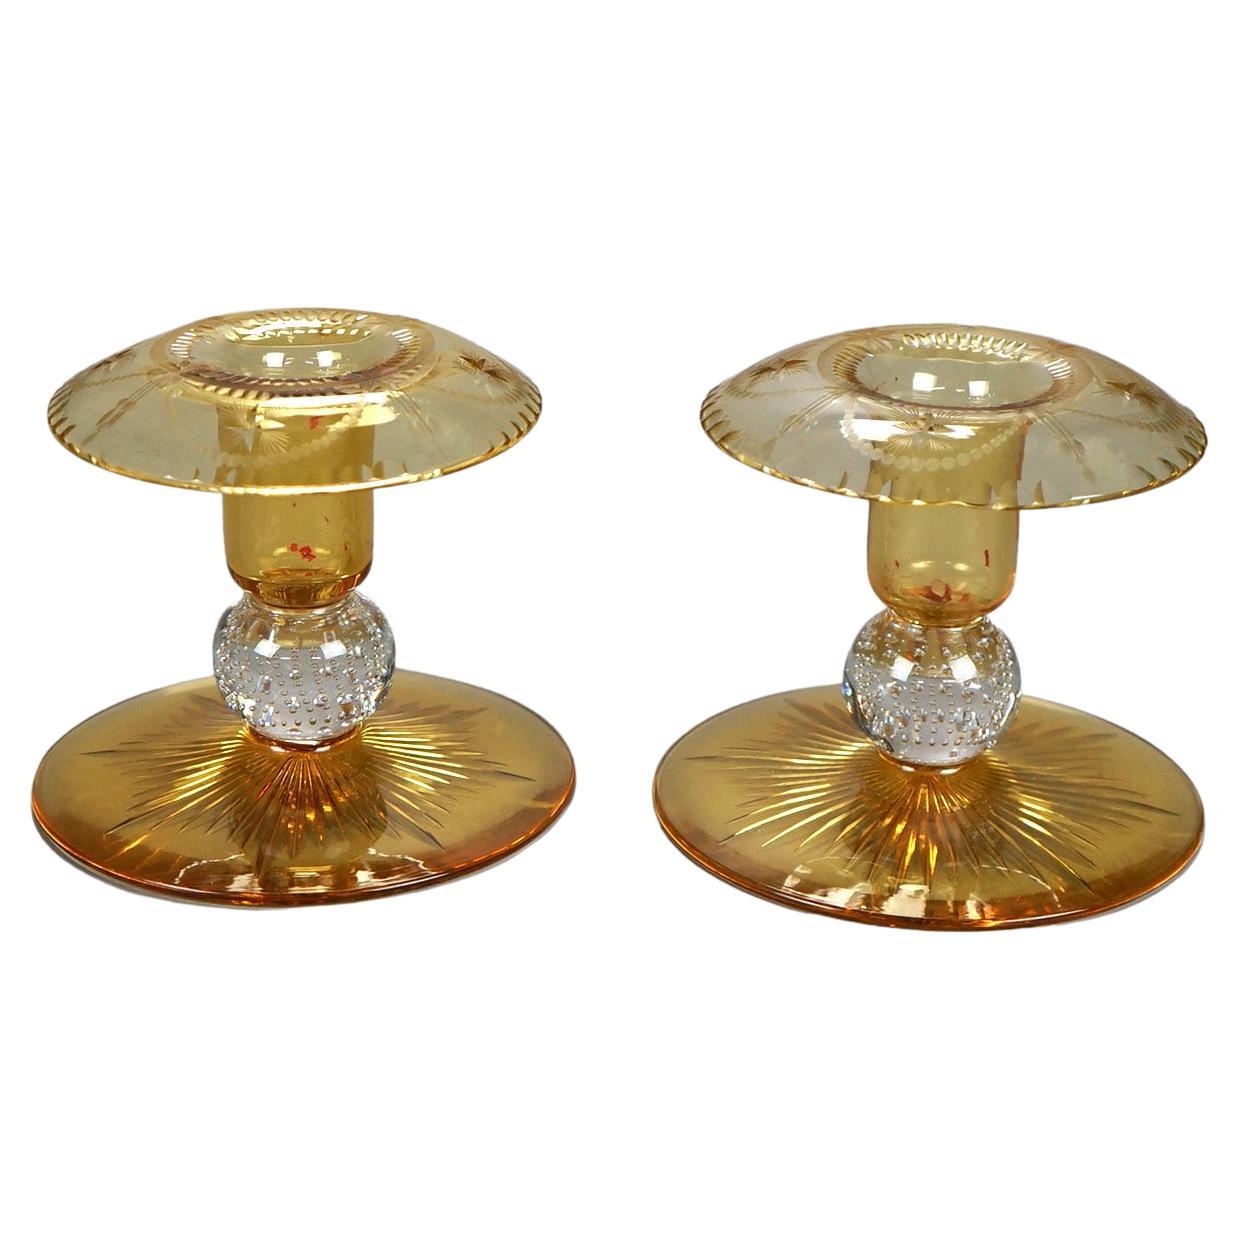 Antique Pair of Pairpoint Amber Cut Glass Candlesticks Circa 1920